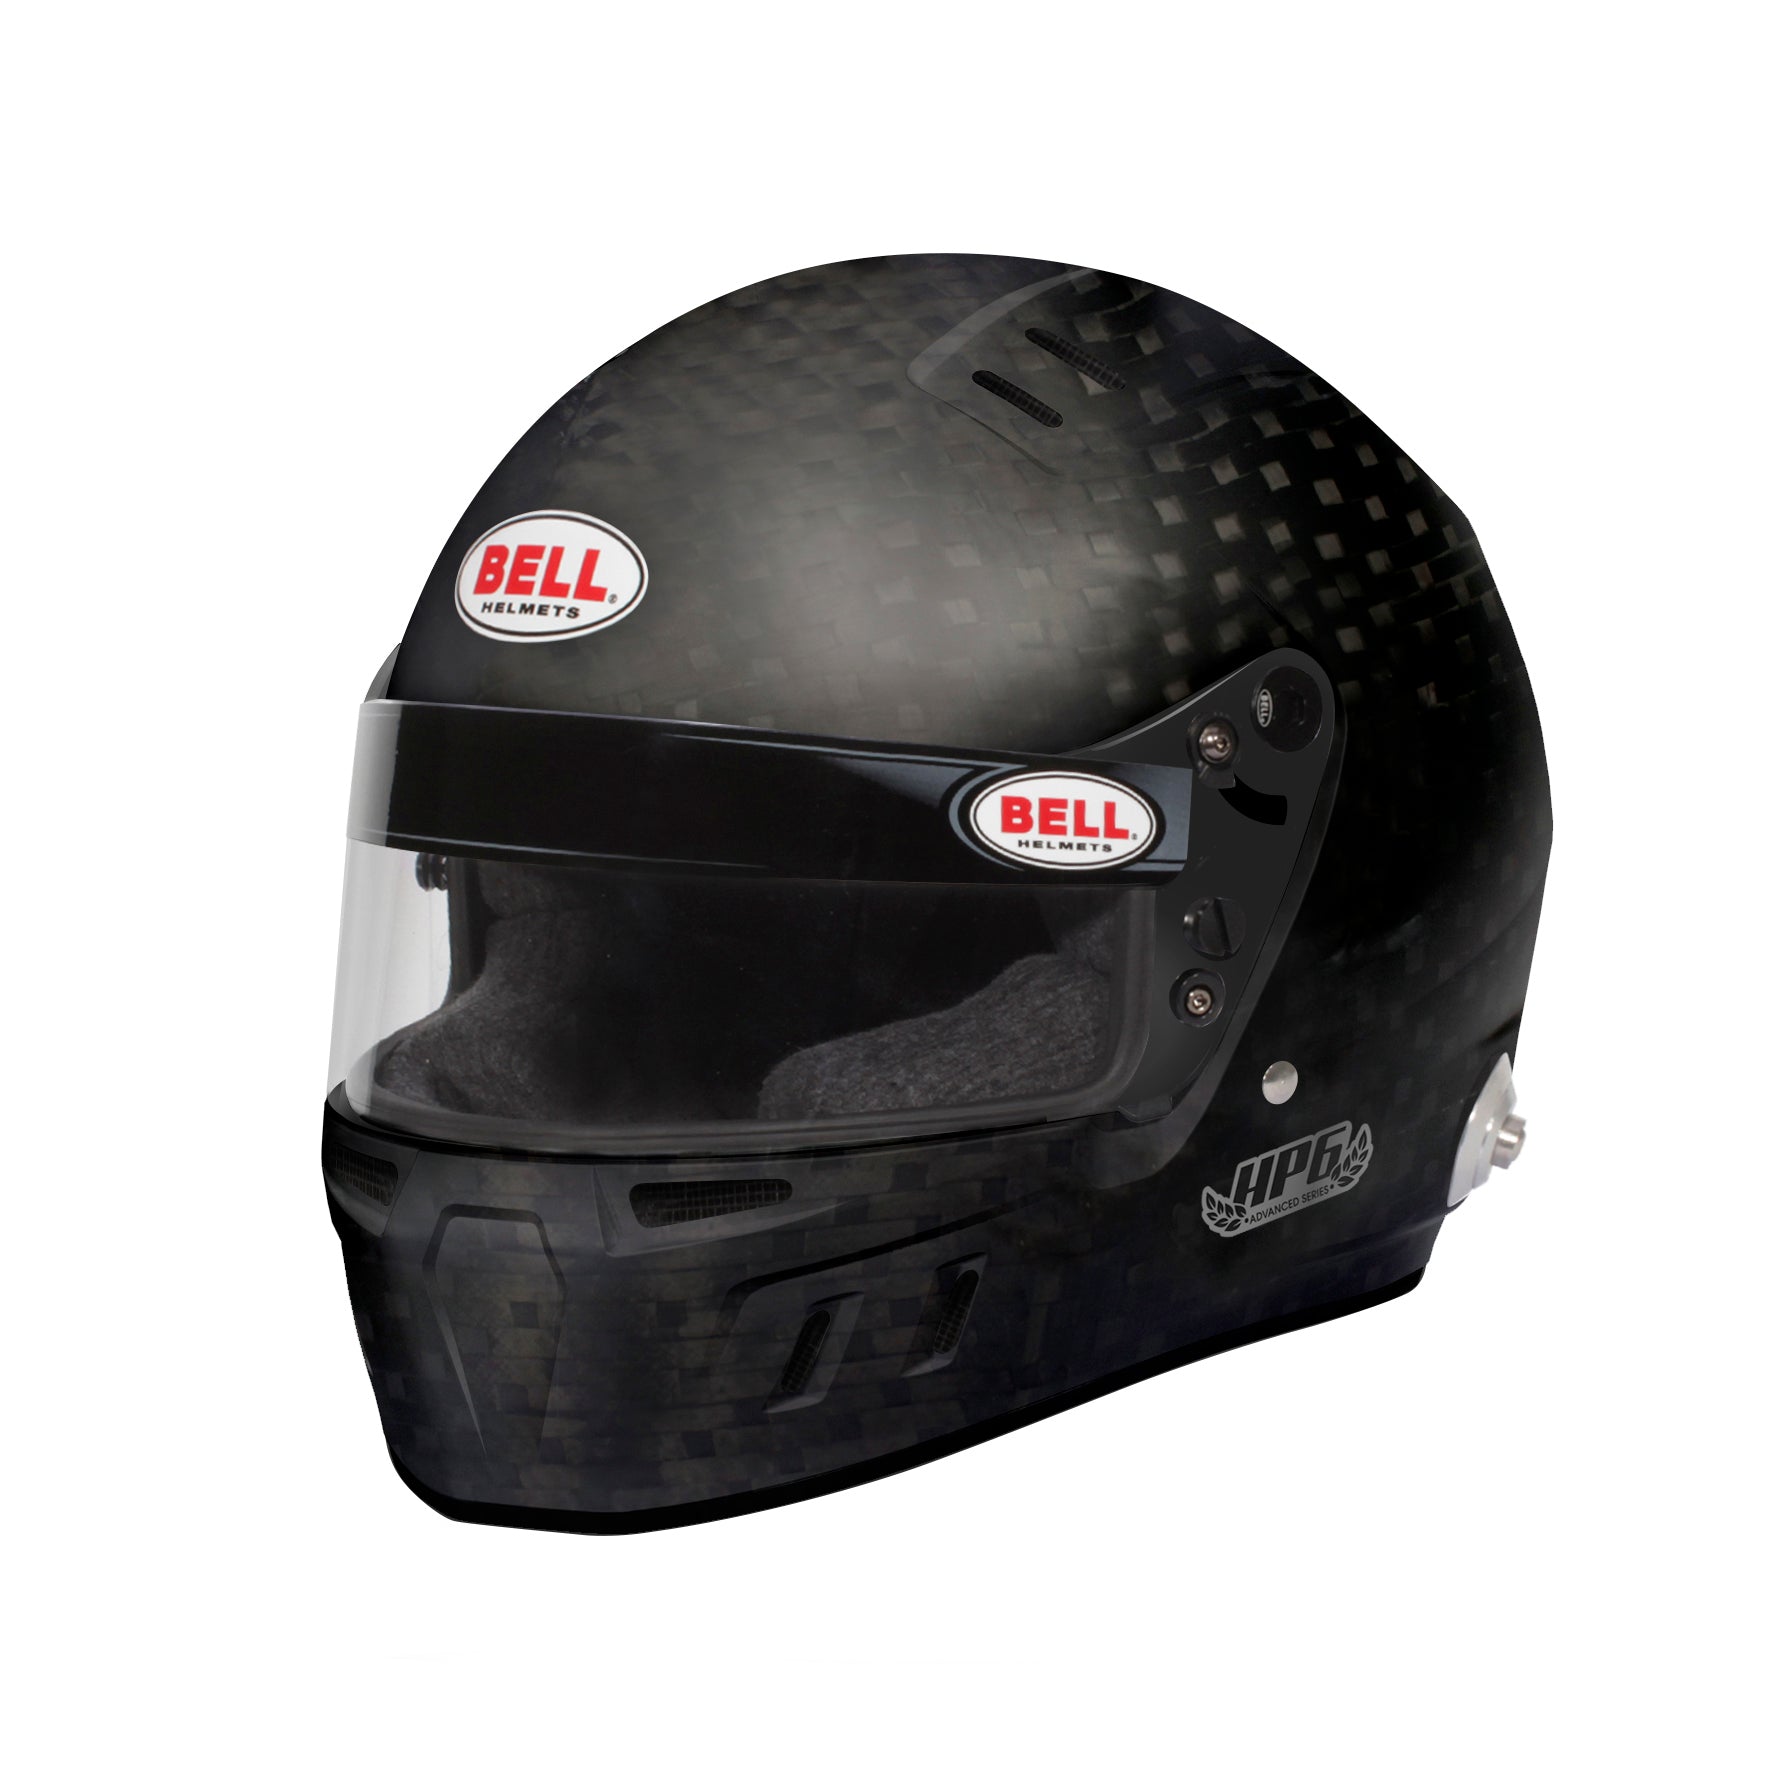 BELL 1140010 HP6 RD Racing helmet full-face, HANS, FIA8860-2018, carbon, size 54 (6 3/4) Photo-0 